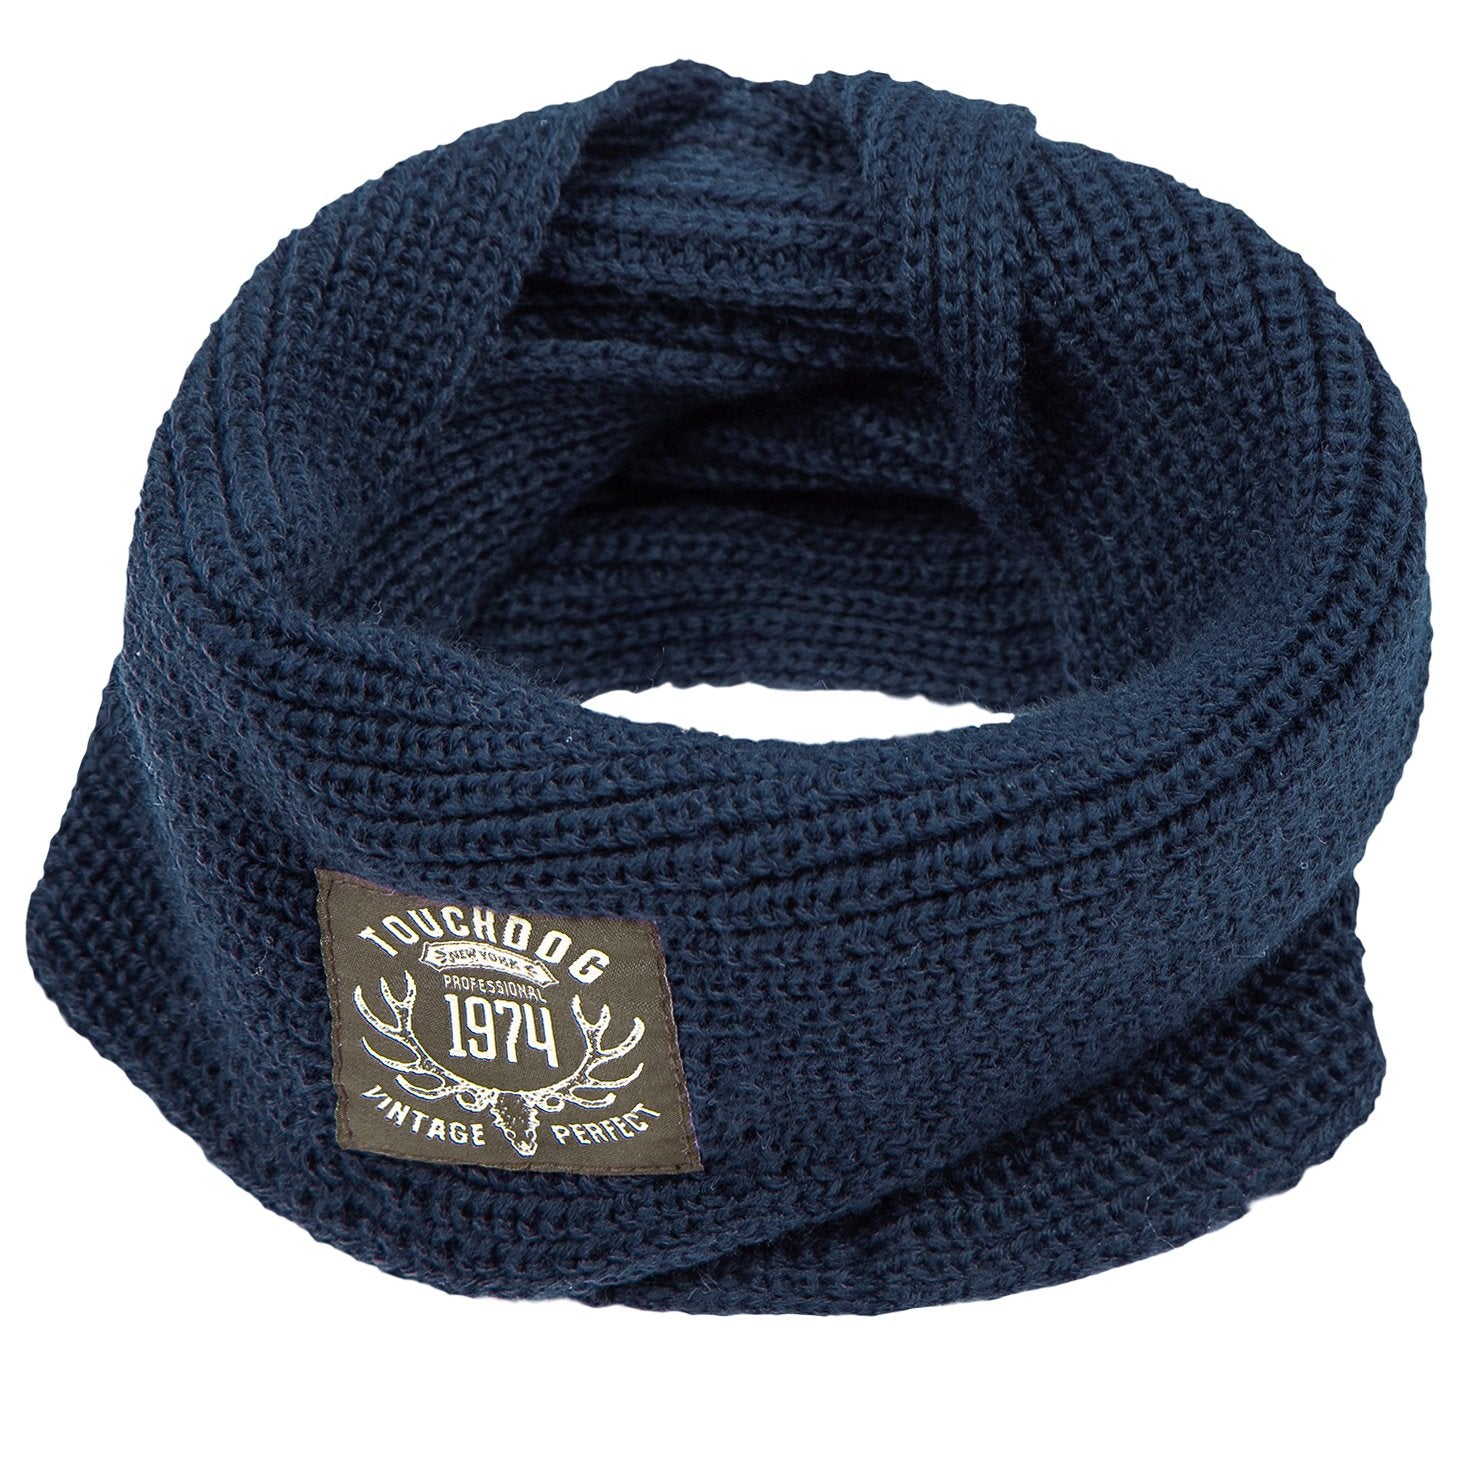 Touchdog Heavy Knitted Winter Dog Scarf - One Size - Navy